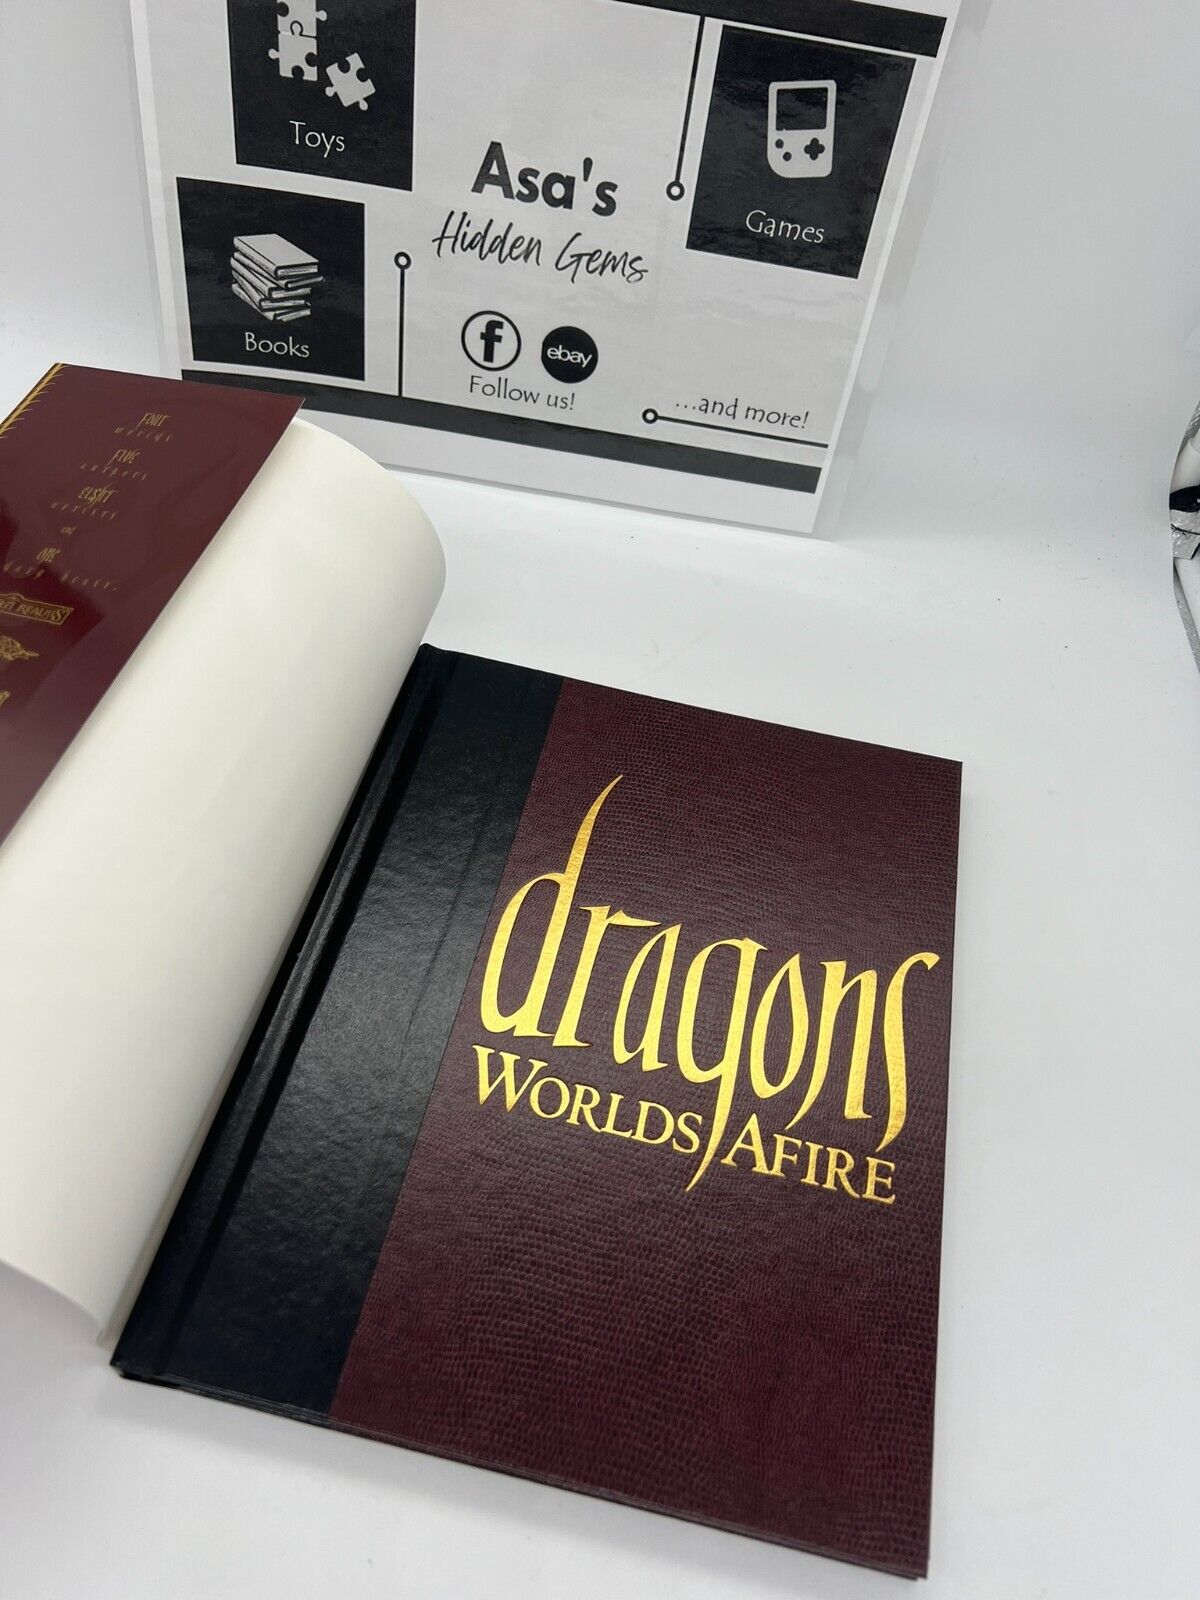 Dragons : Worlds Afire by R.A. Salvatore (2006, Hardcover)